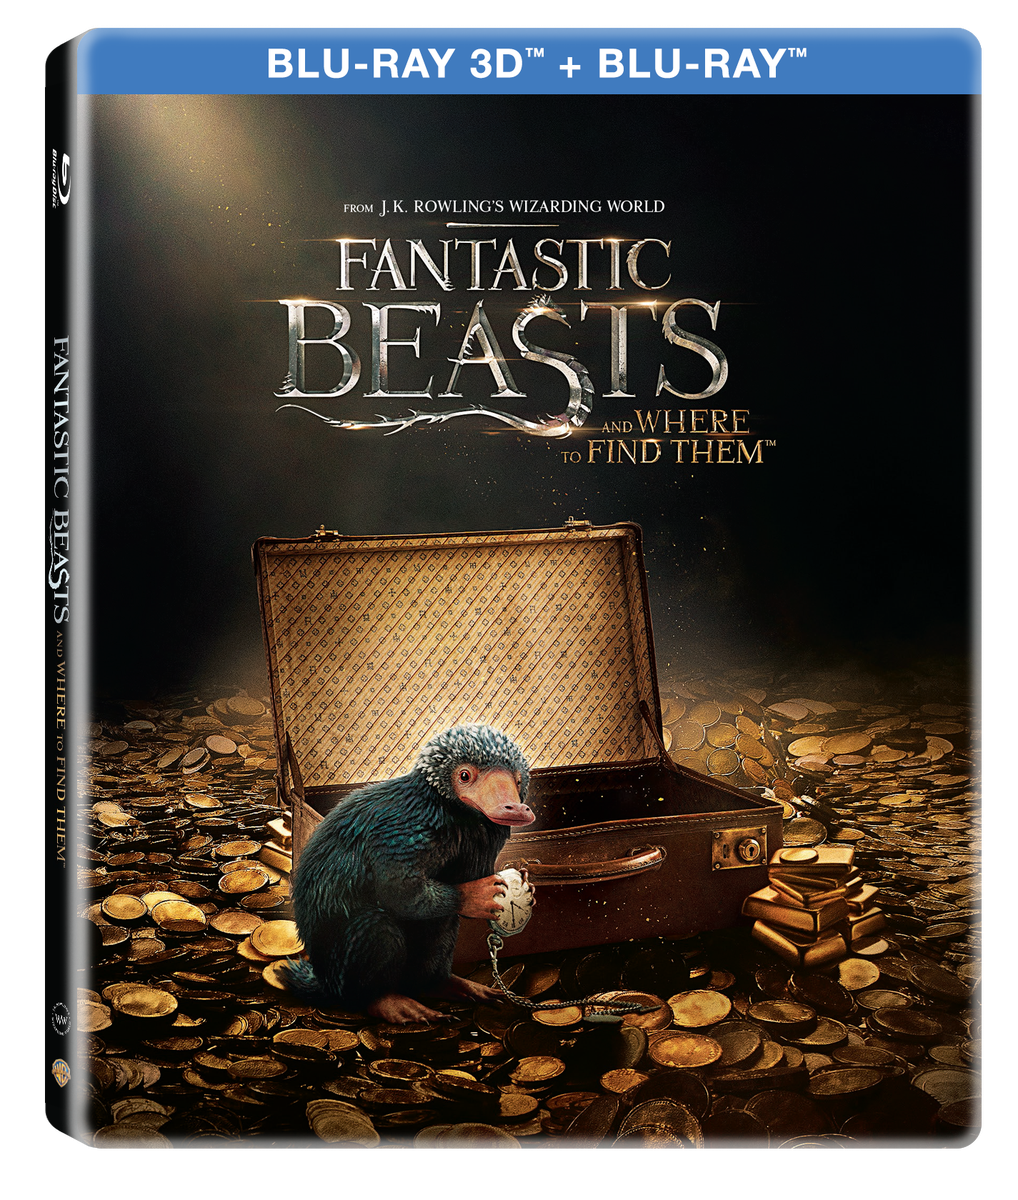 Animale Fantastice si unde le poti gasi 3D (Blu Ray Disc) Steelbook / Fantastic Beast and Where to Find Them | David Yates